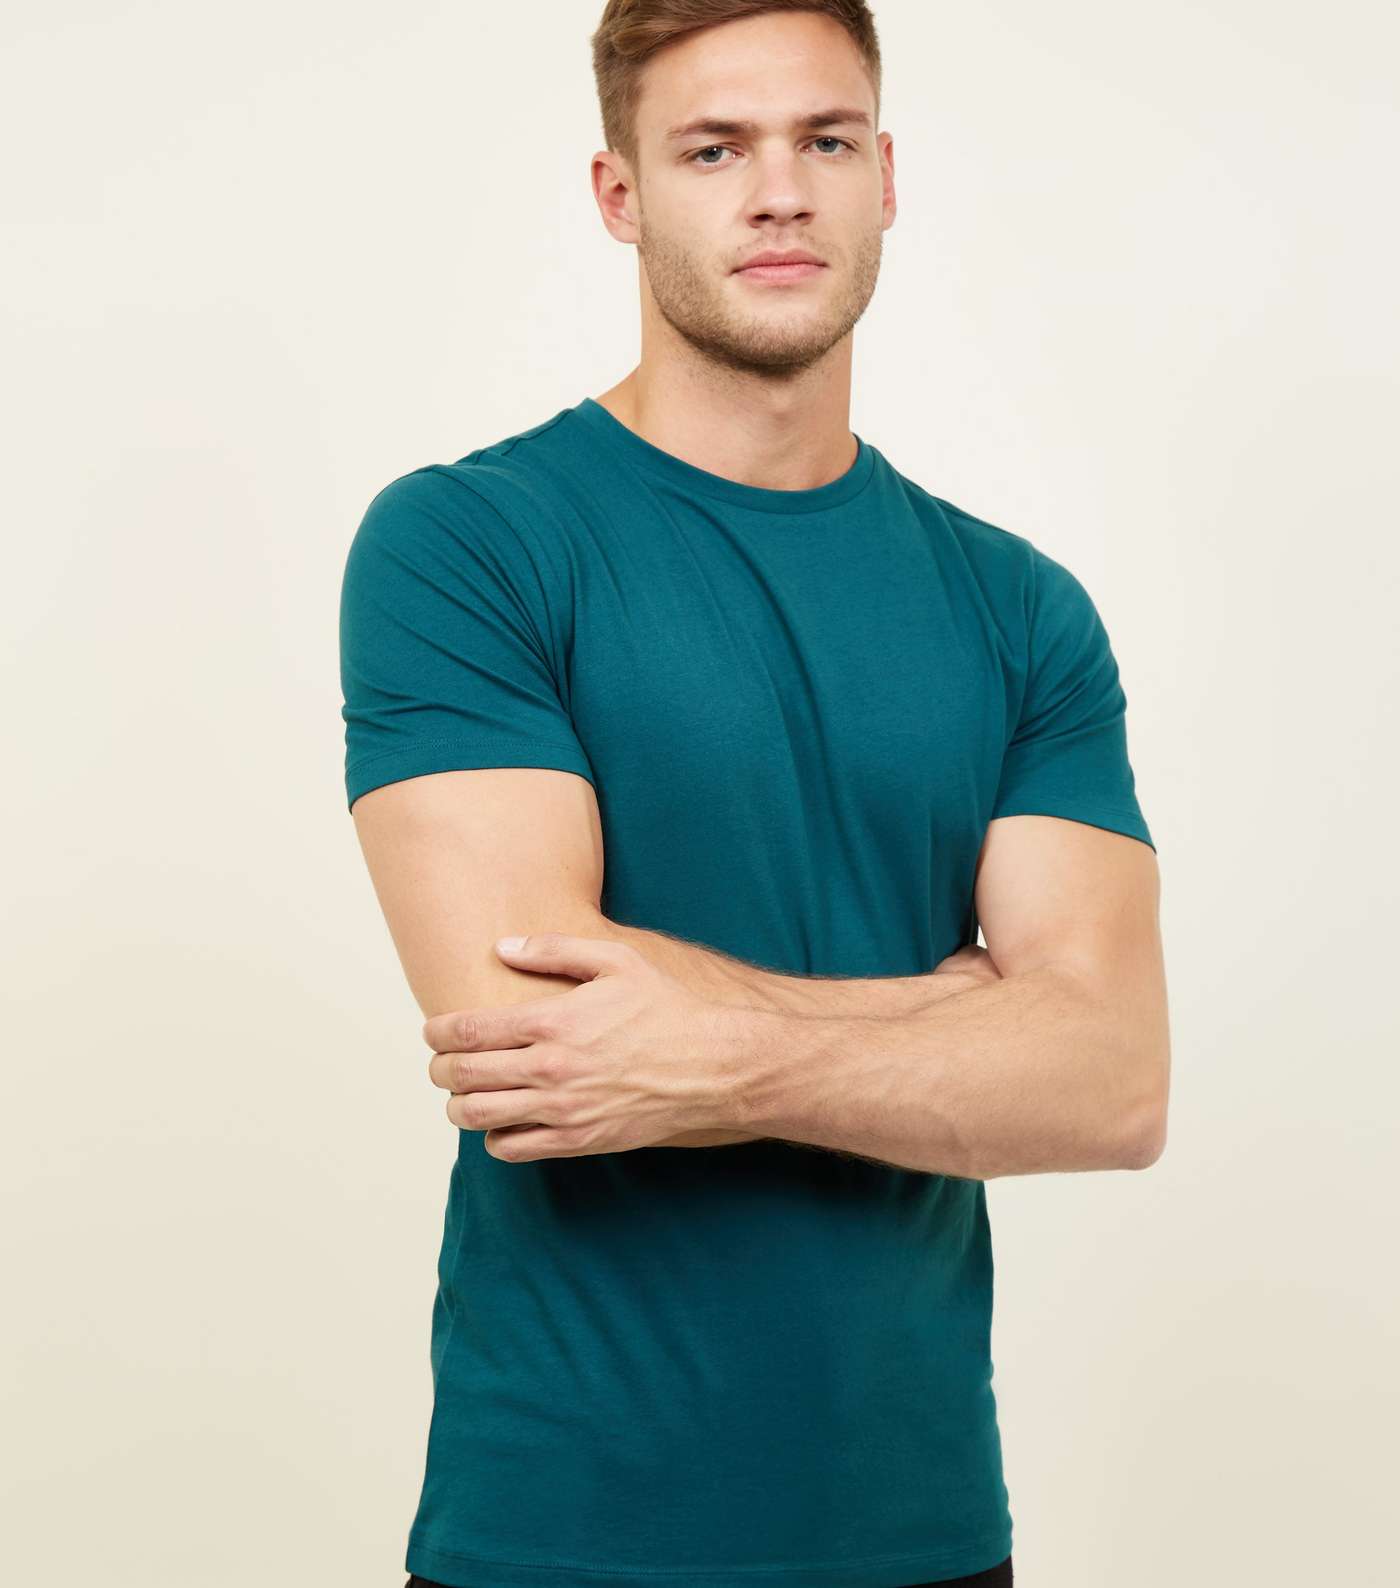 Teal Short Sleeve Muscle Fit T-Shirt